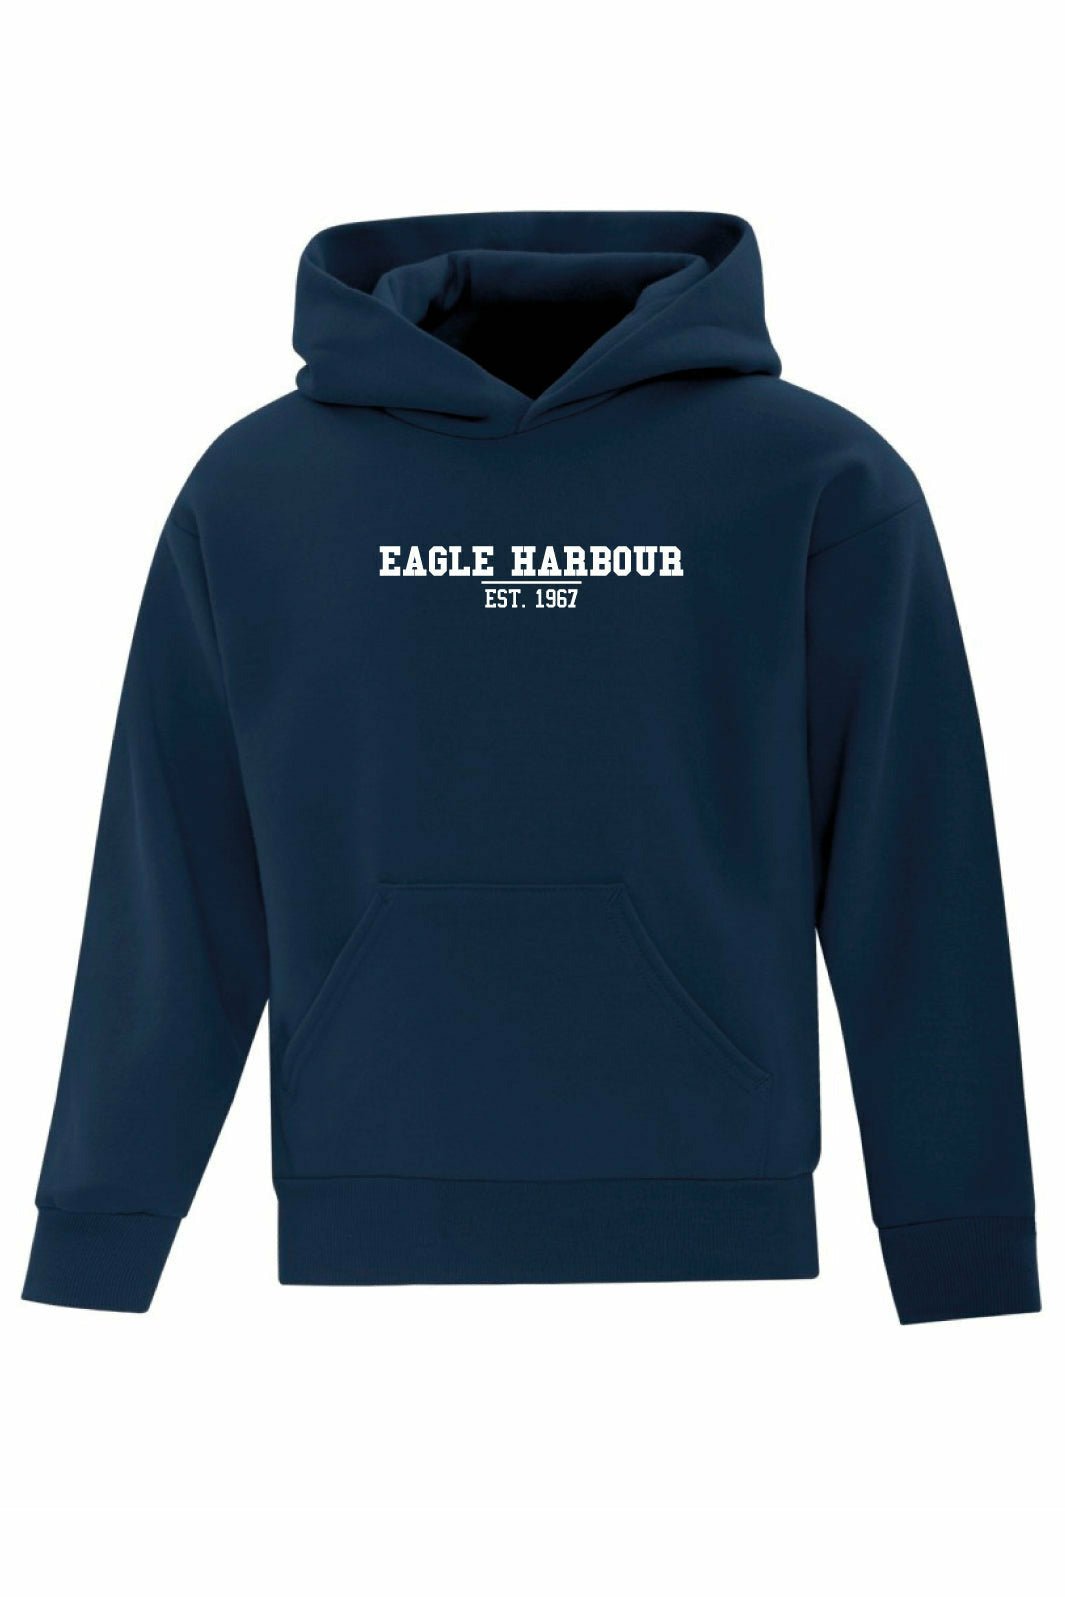 Eagle Harbour EST Pullover Hoodie (Youth) - Oddball Workshop